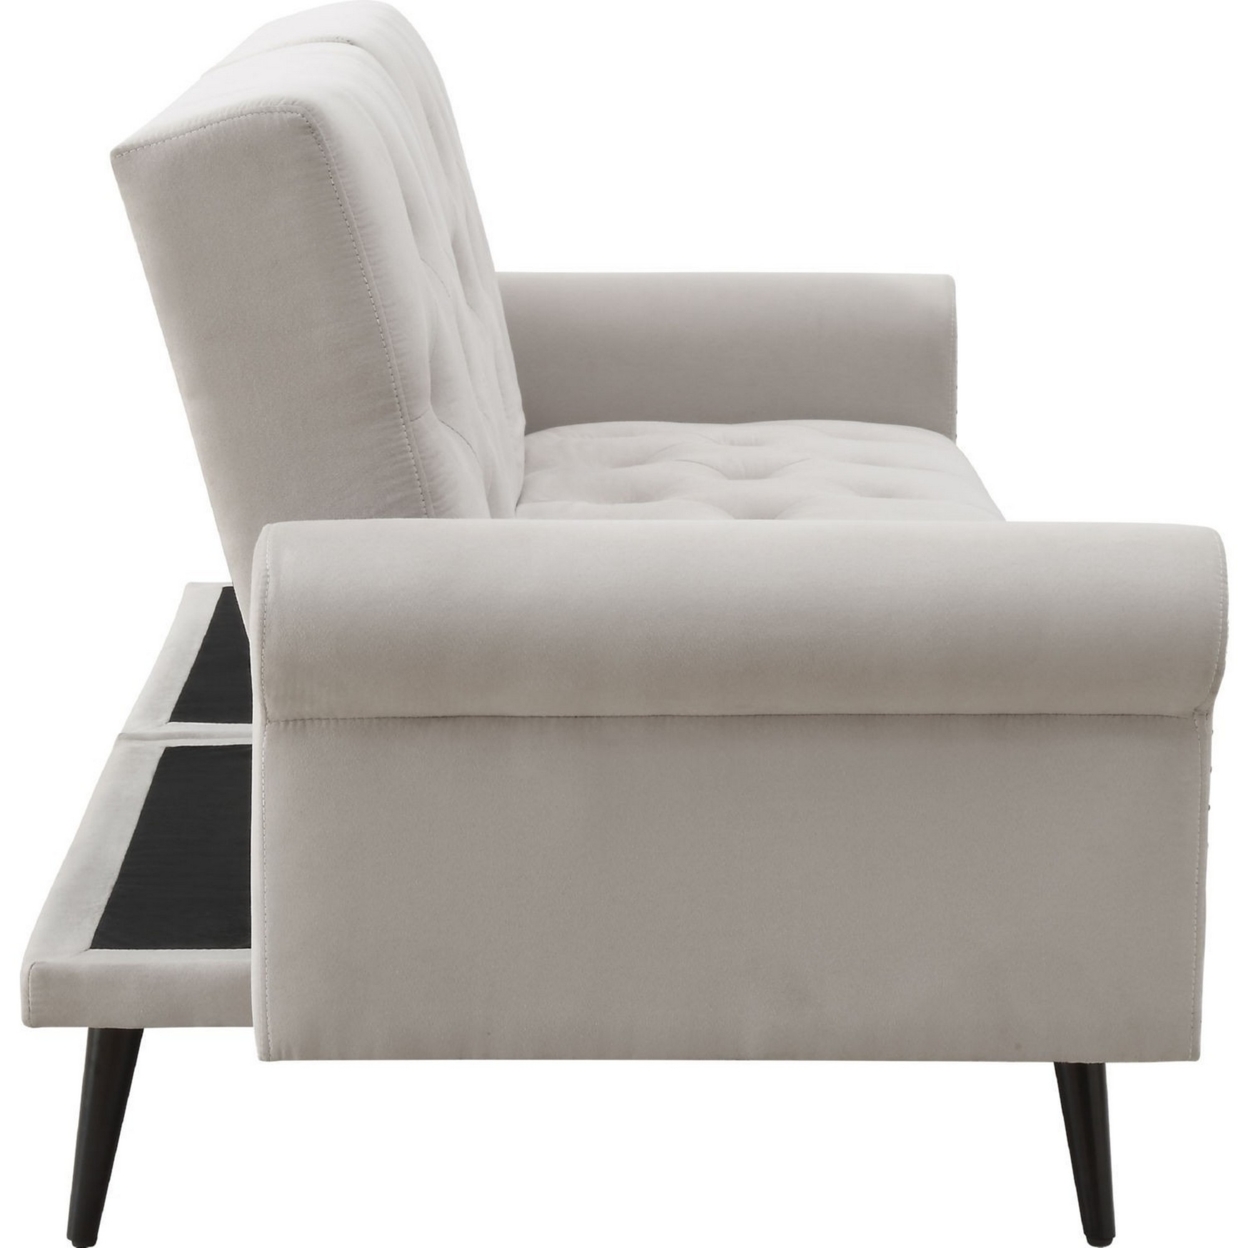 Adjustable Sofa With Button Tufting And Rolled Arms, White- Saltoro Sherpi